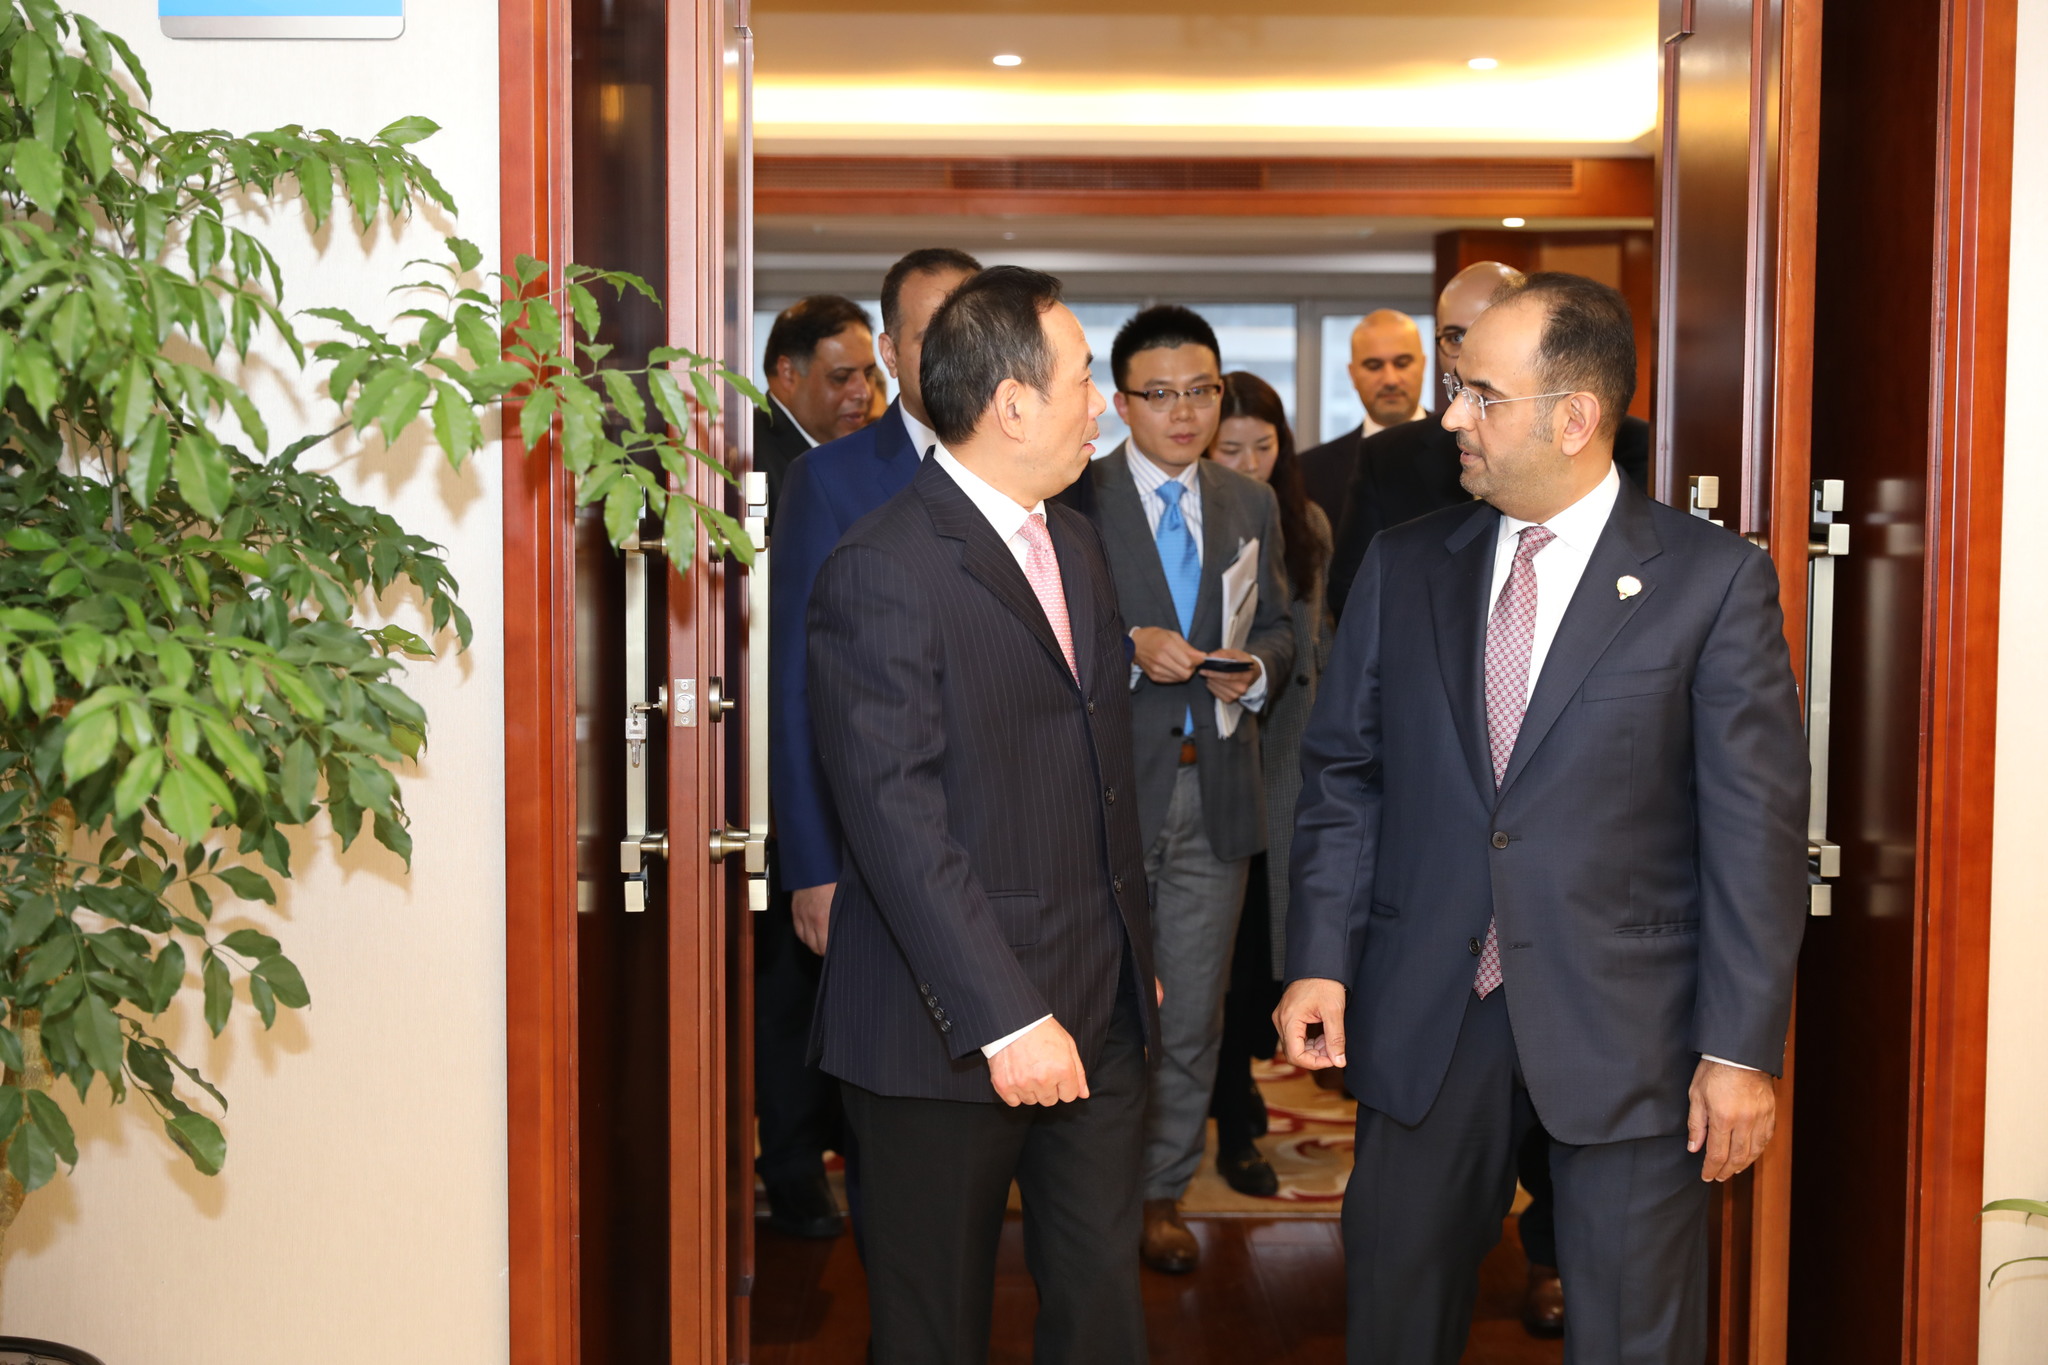 Kuwait's Finance Minister Dr. Nayef Al-Hajraf with Chinese official